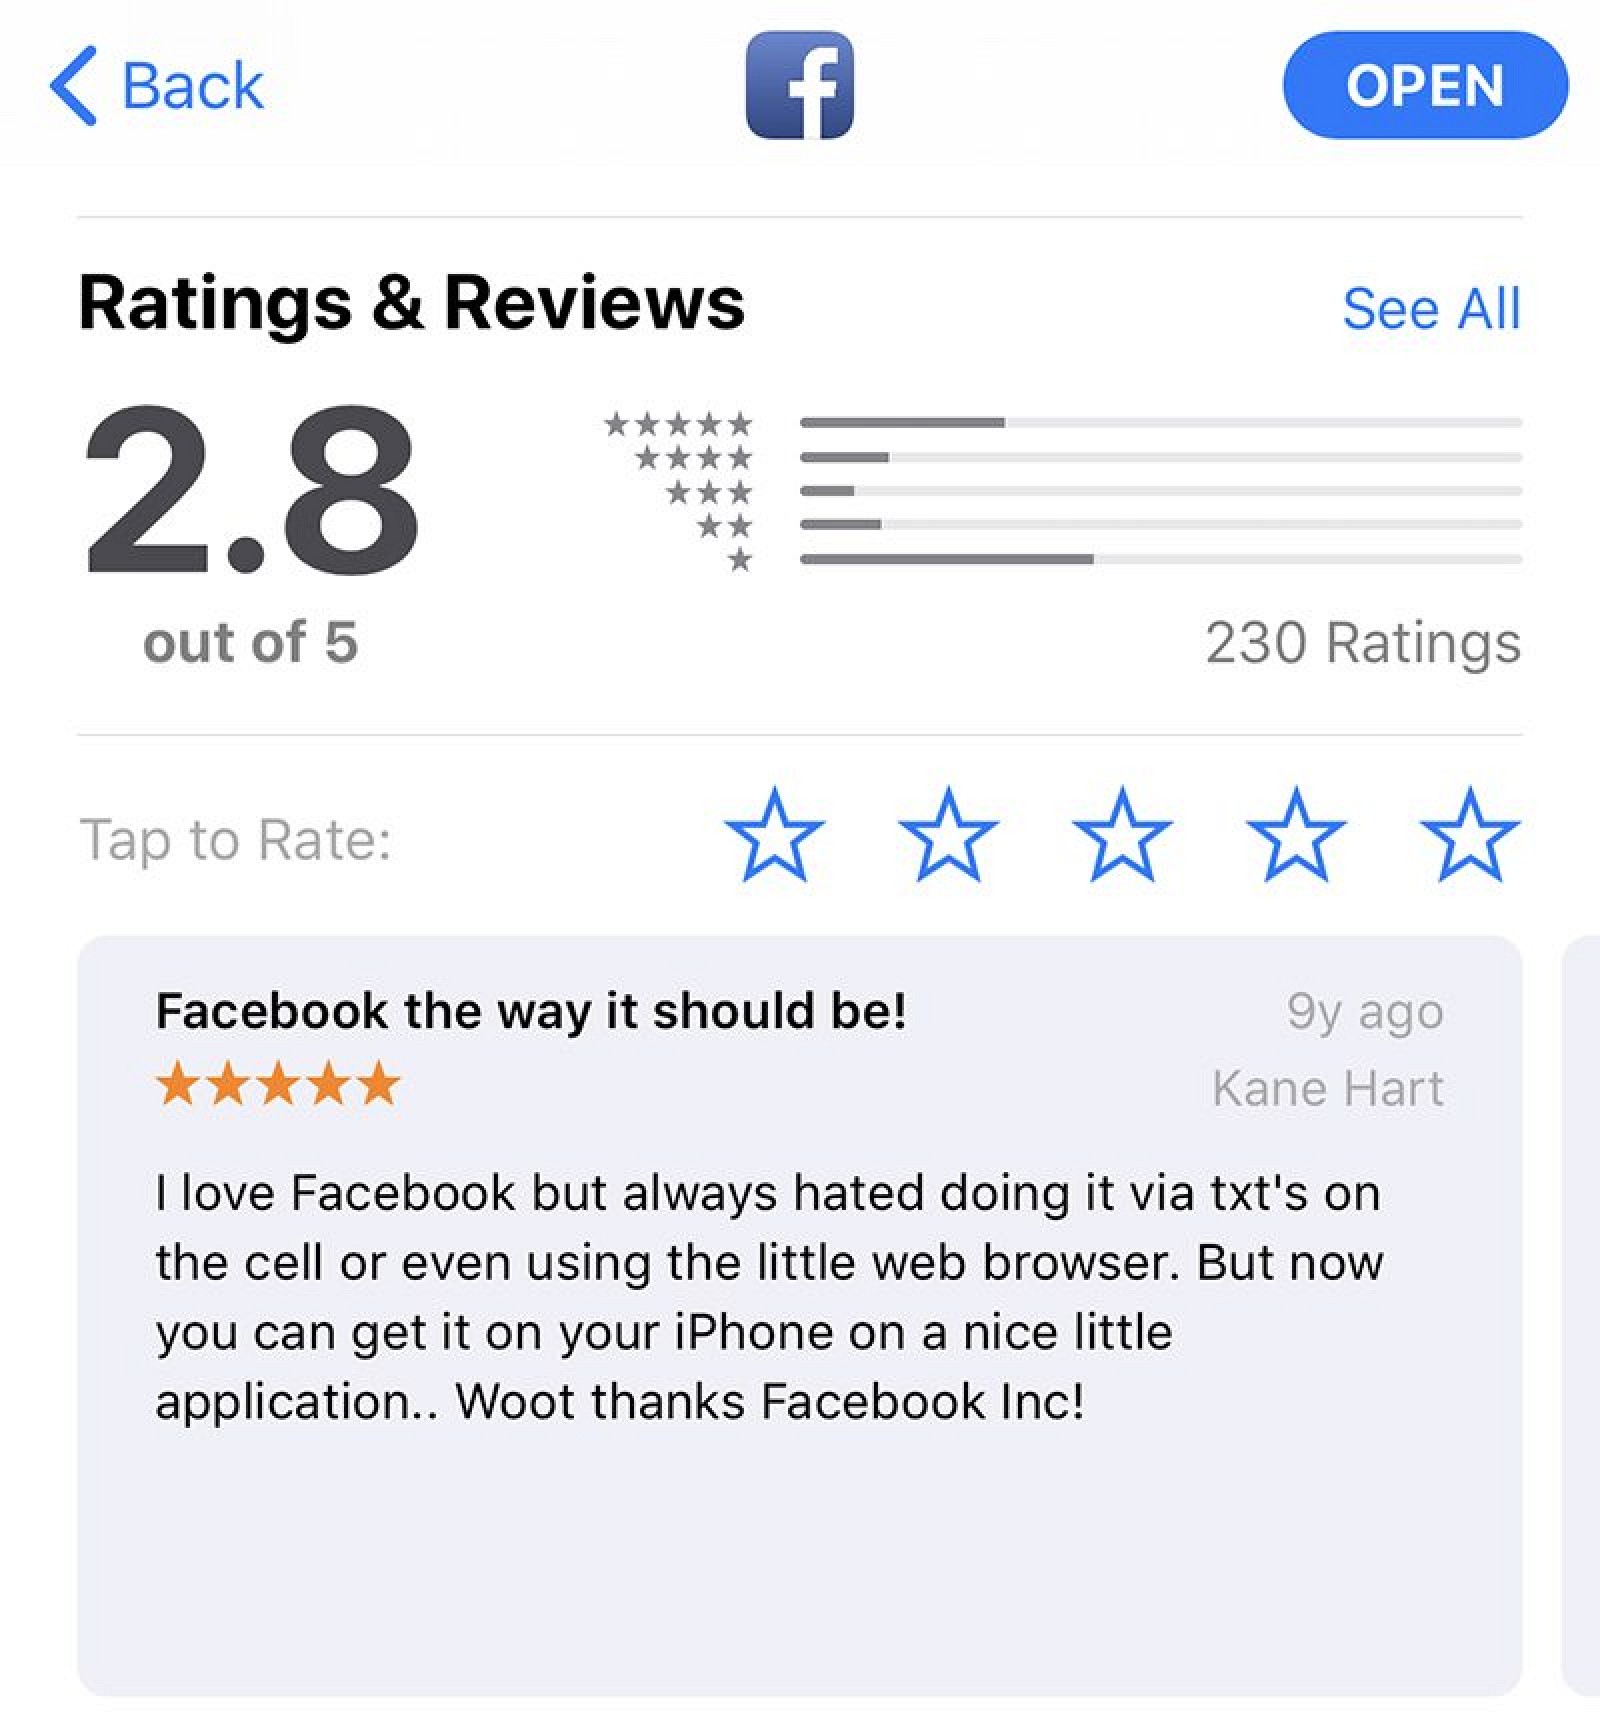 App Store Surfacing Old Reviews From as Early as 2008 for Some Users